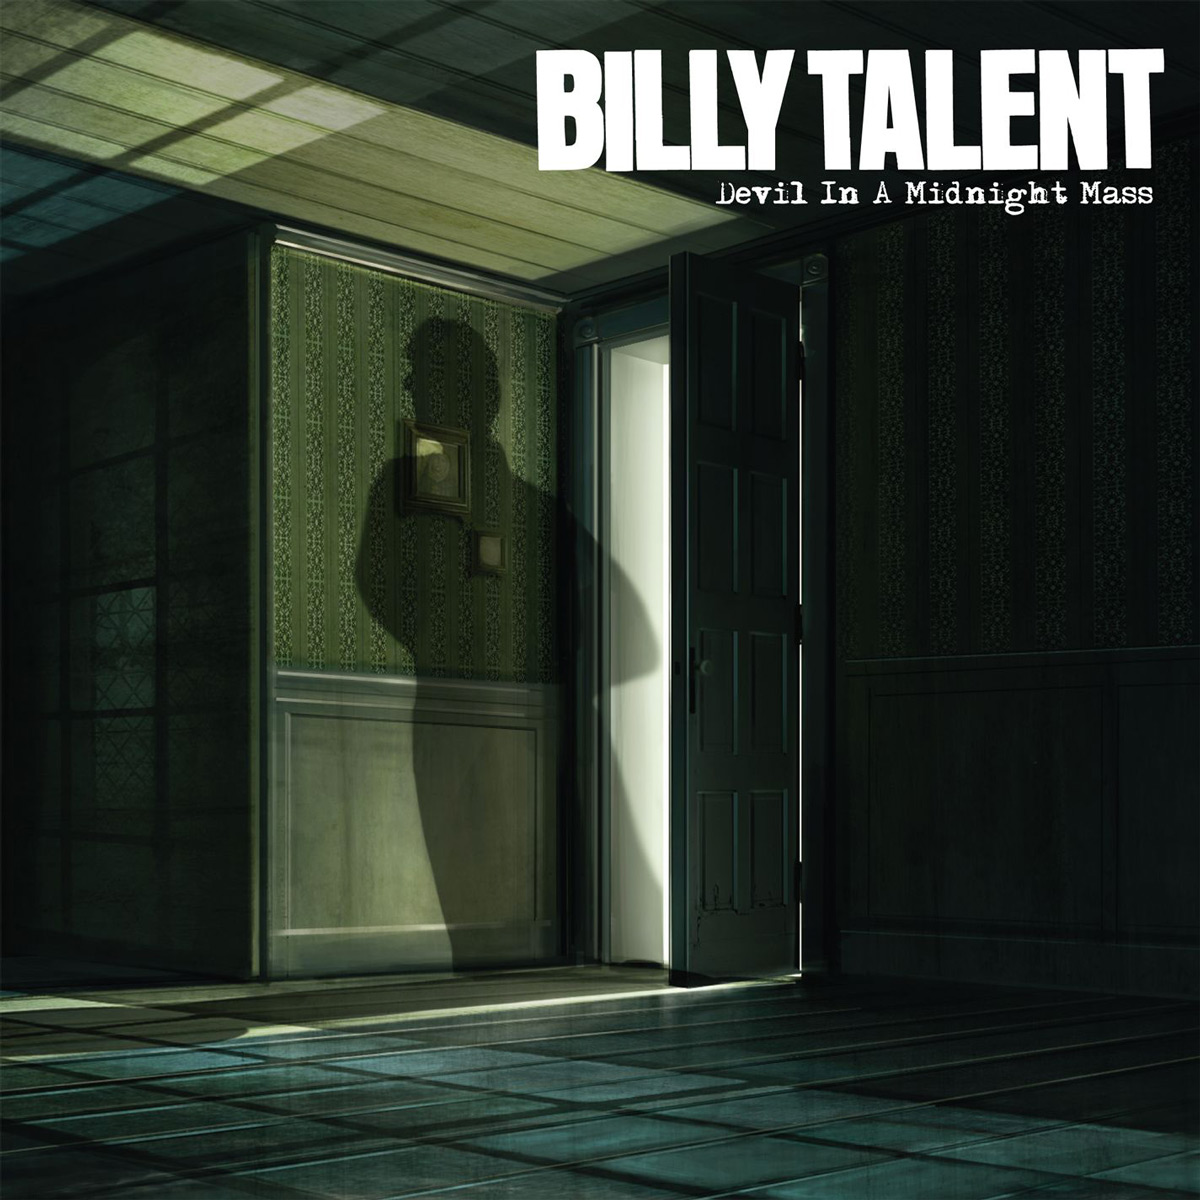 Discographie - Billy Talent - Devil in a Midnight Mass - Single